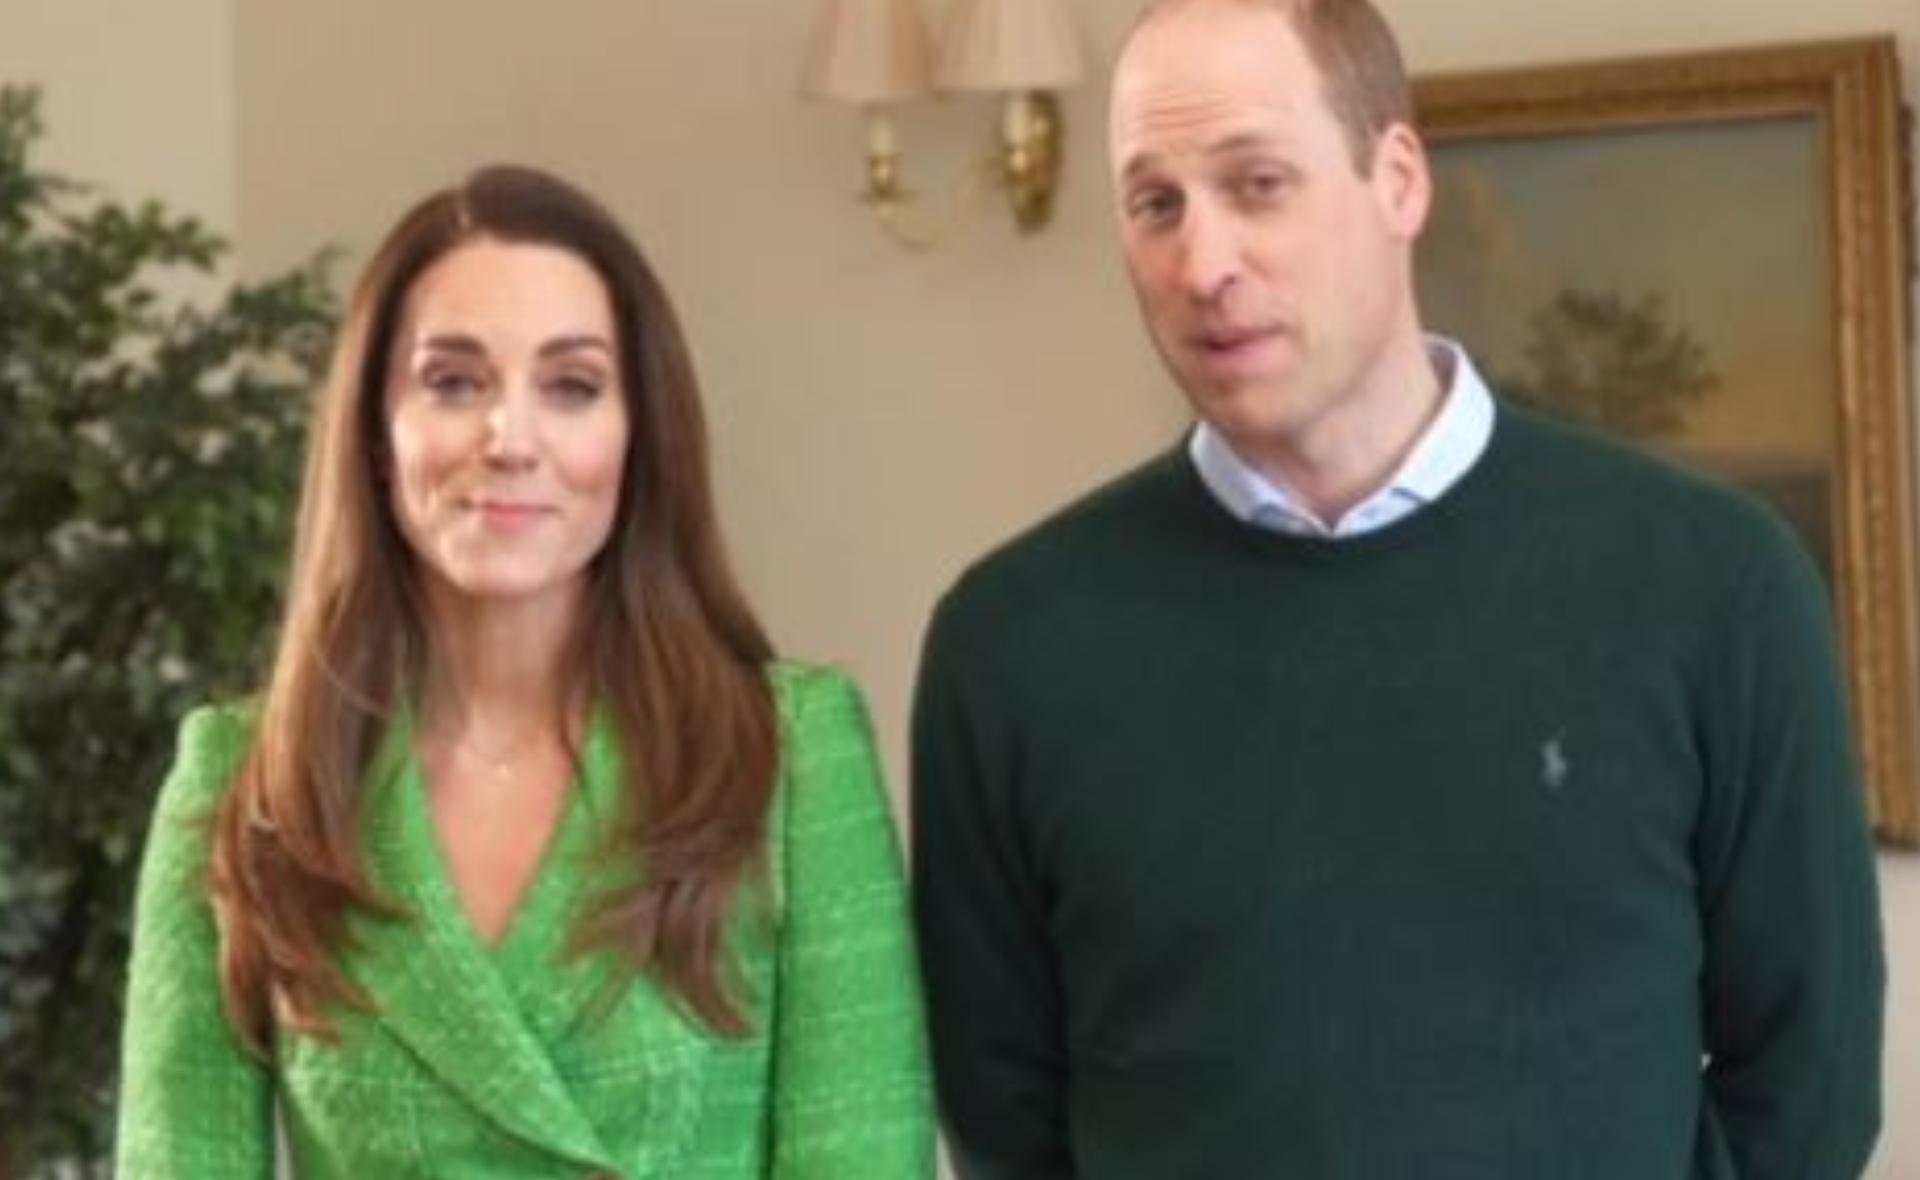 Happy St Paddy’s! Duchess Catherine & Prince William are joined by Jacinda Ardern, Joe Biden and more to celebrate Ireland’s National Day